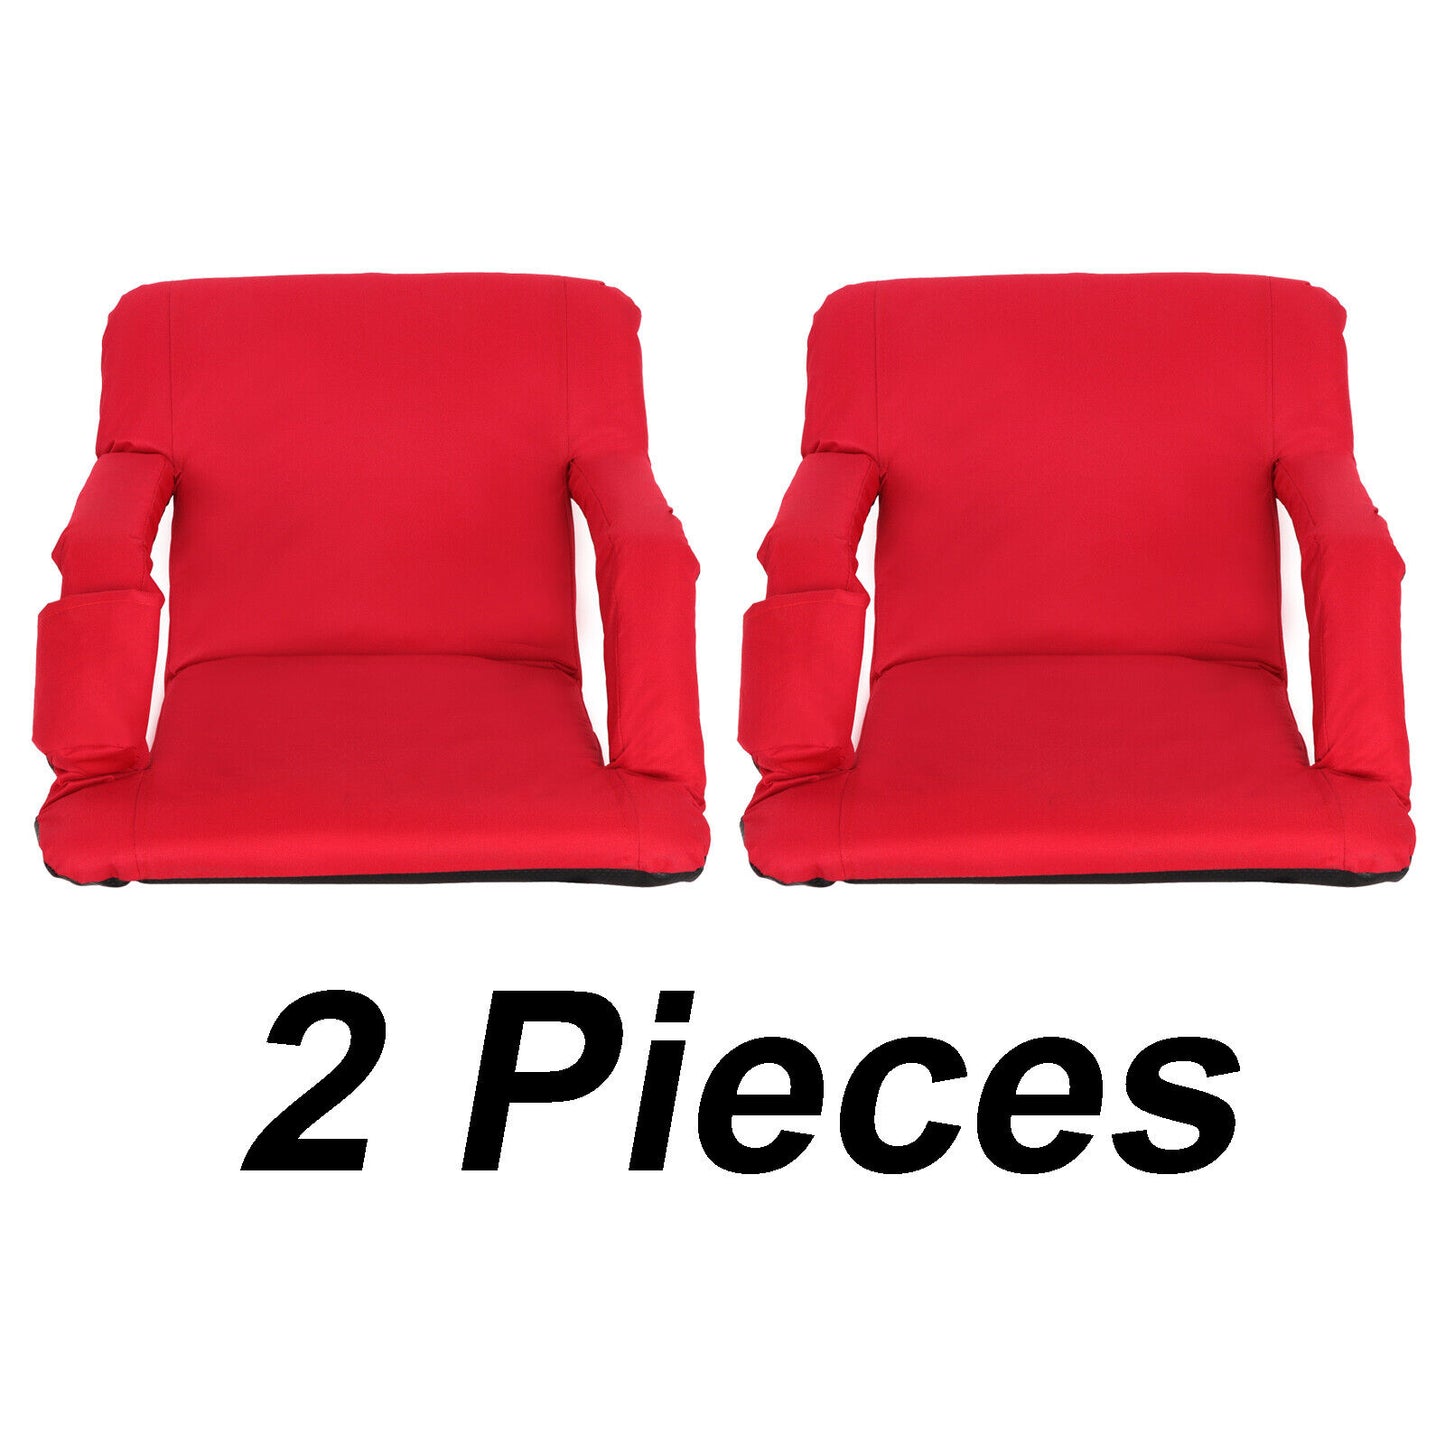 2 Pieces Wide Stadium Seats Chairs for Bleachers Benches - 5 Reclining Positions